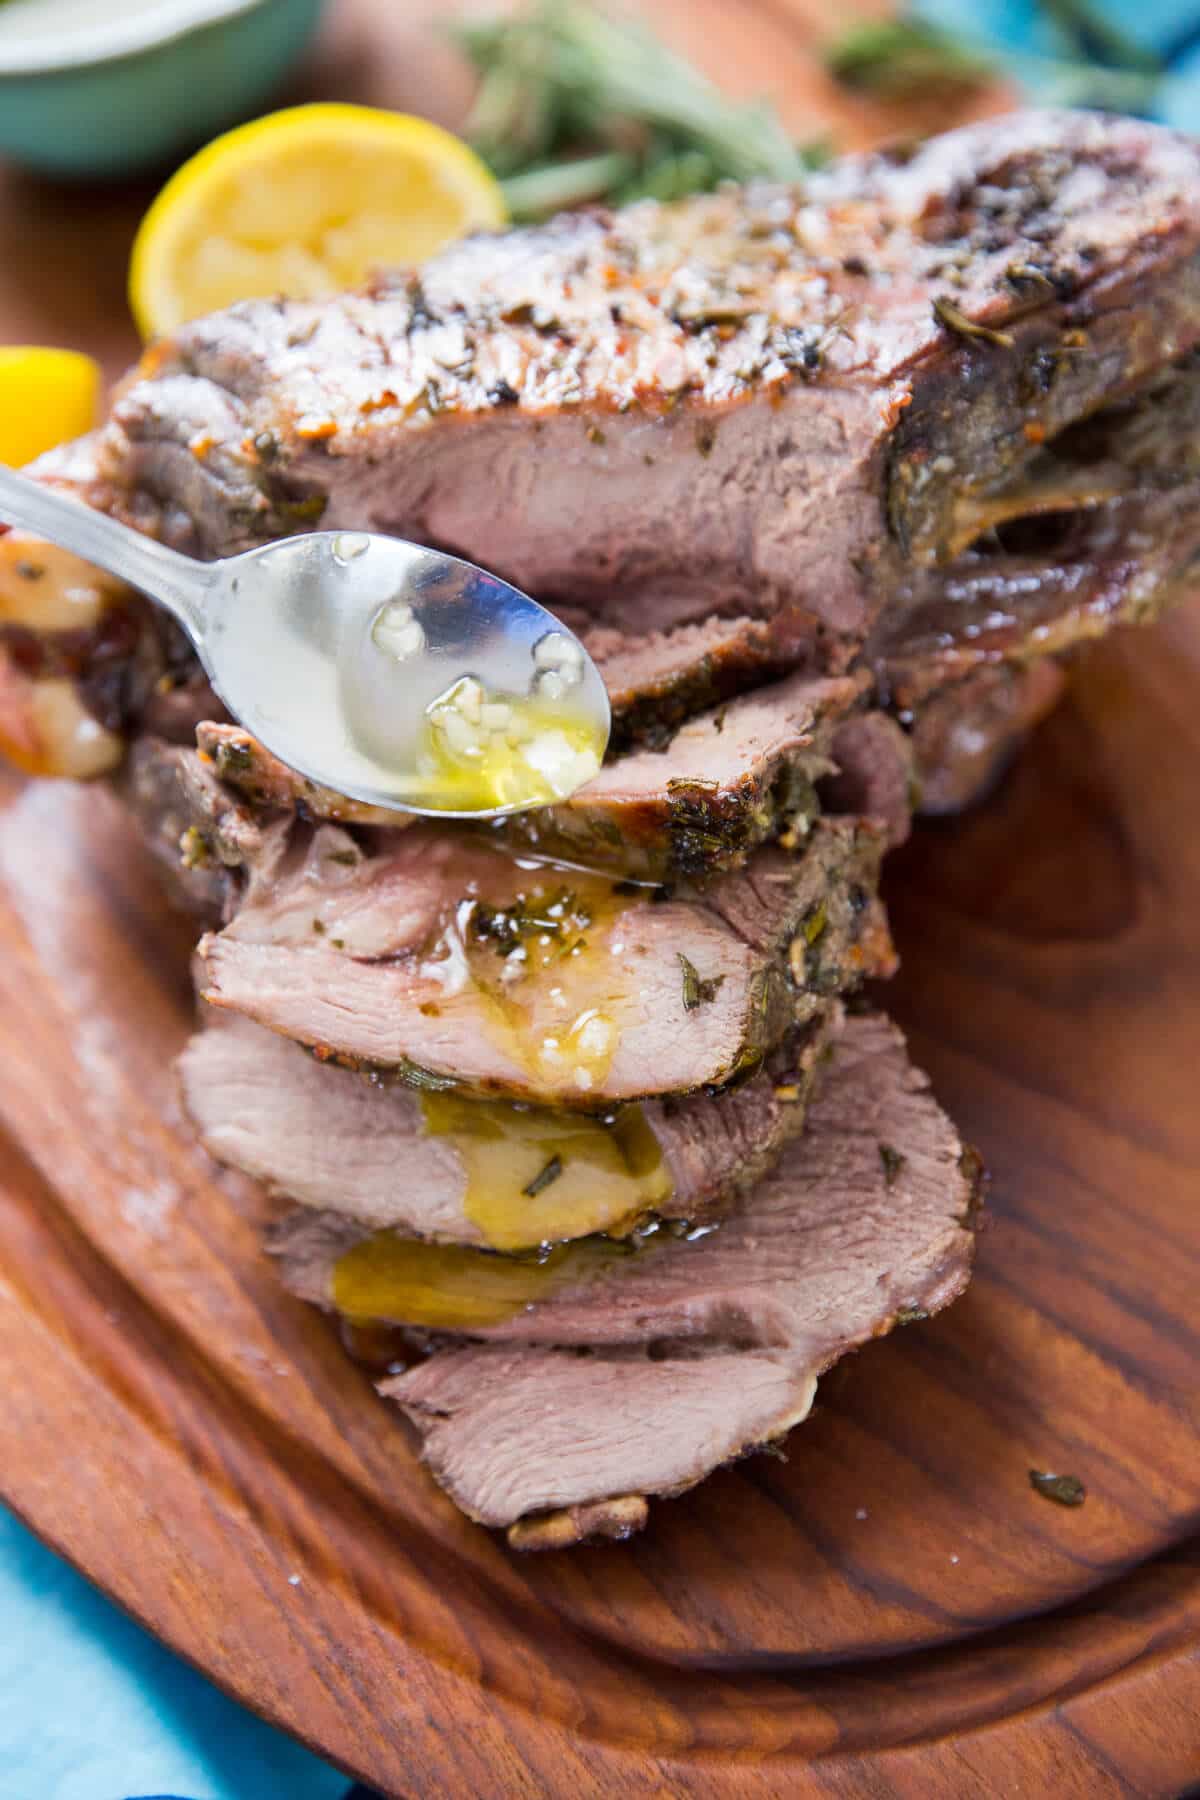 This lamb roast must served with lemon and olive oil for true Greek flavor! This roast is melt-in-your-mouth tender!